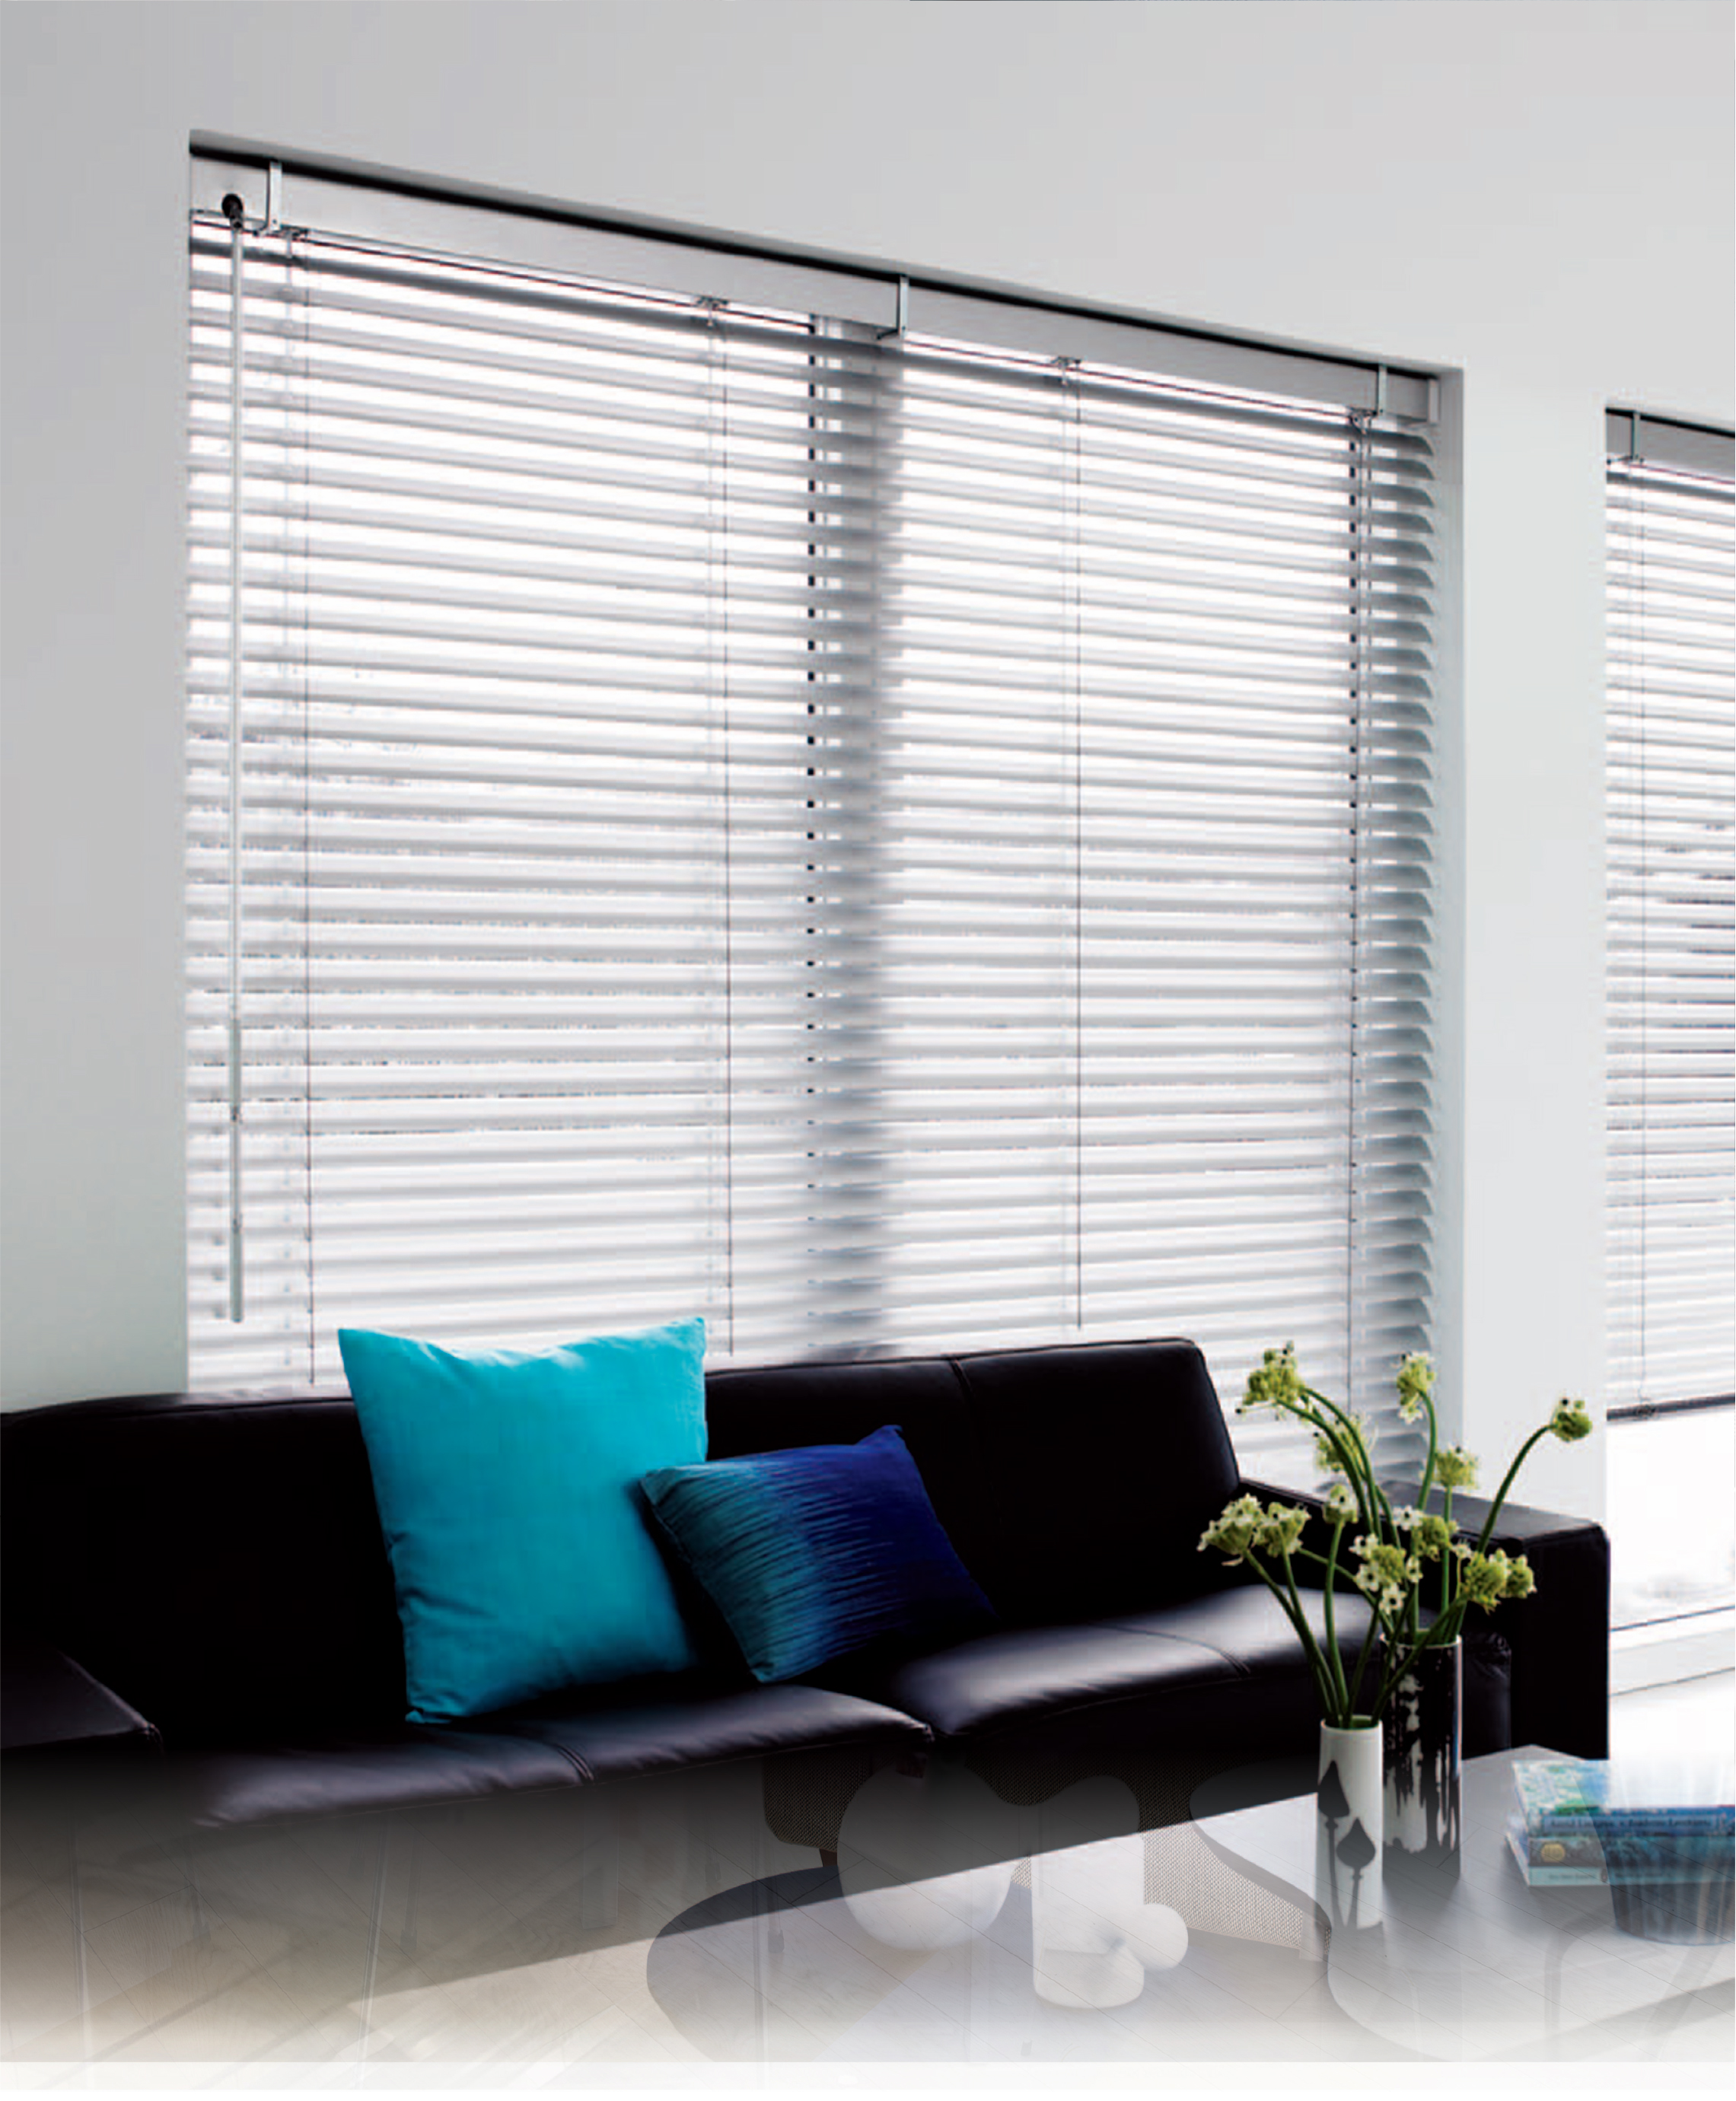 What type of roller blind will be suitable for my space?